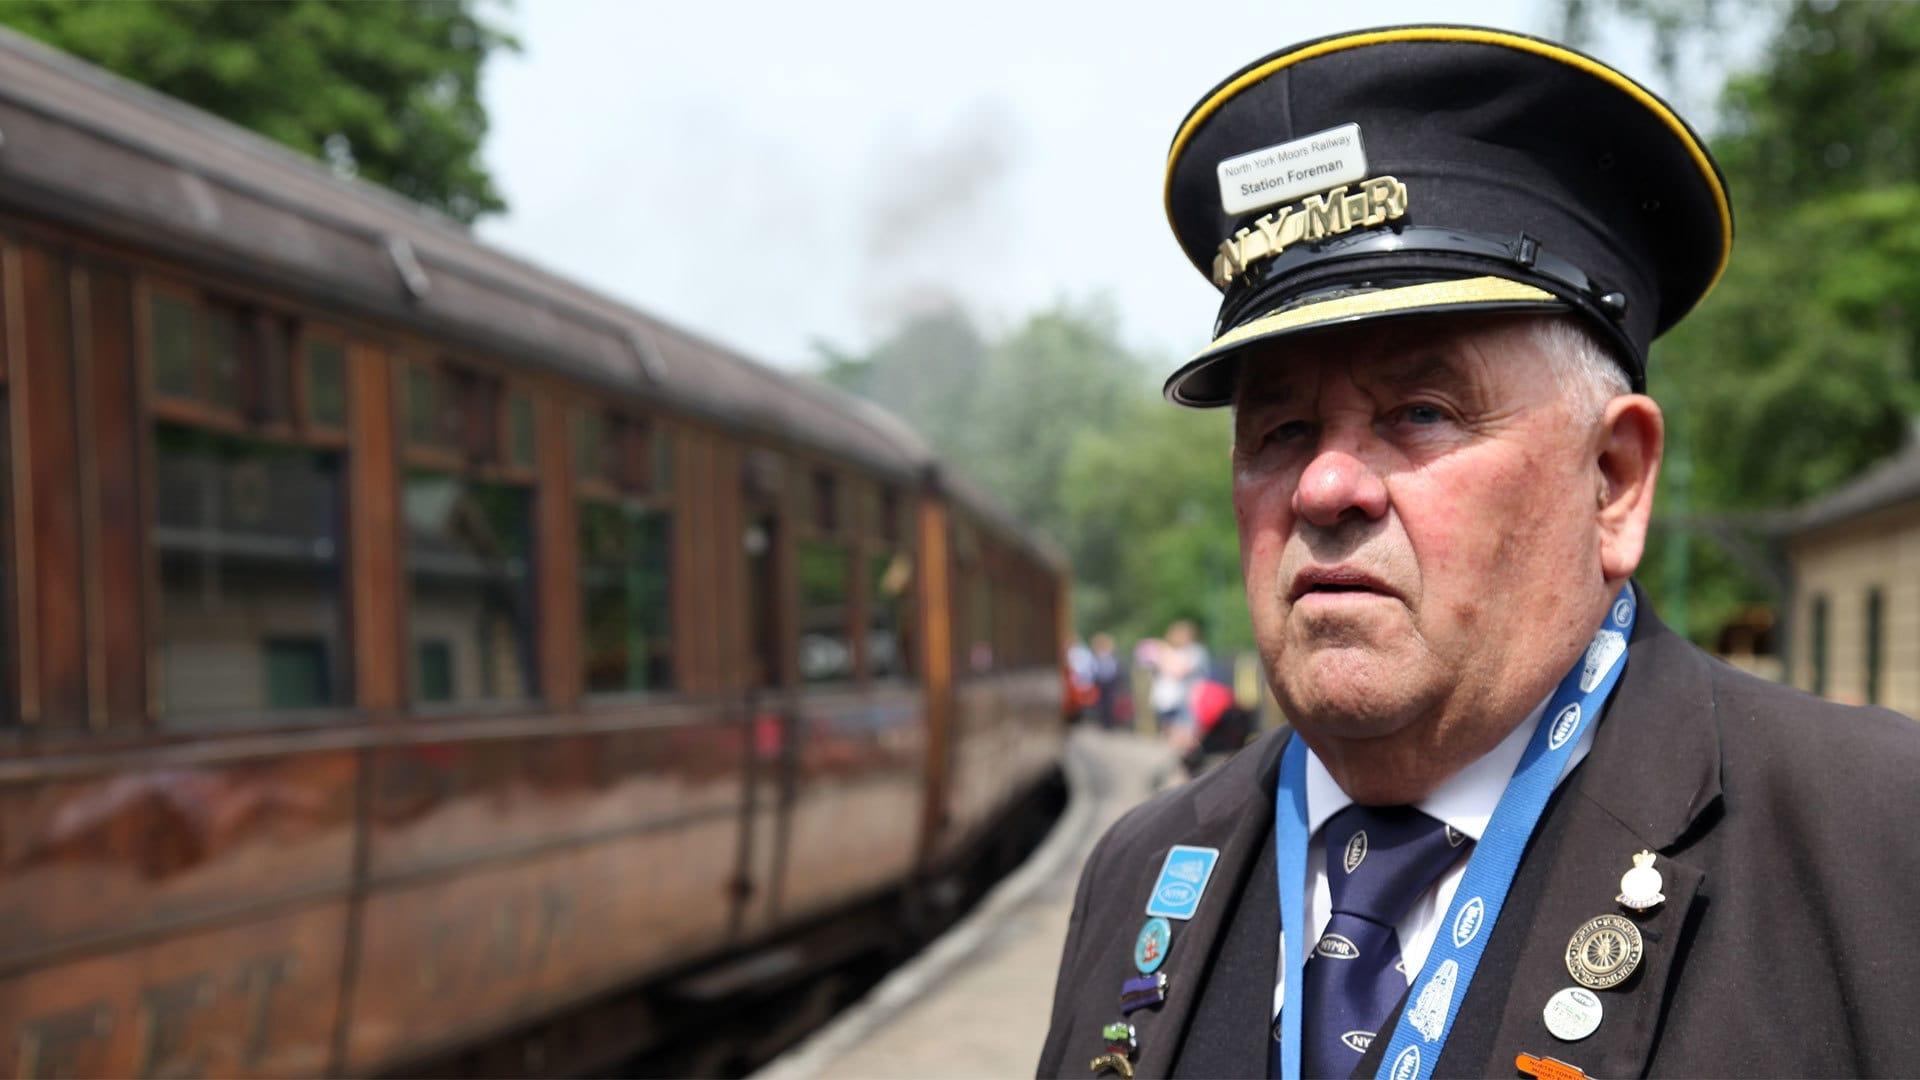 The Yorkshire Steam Railway: All Aboard backdrop